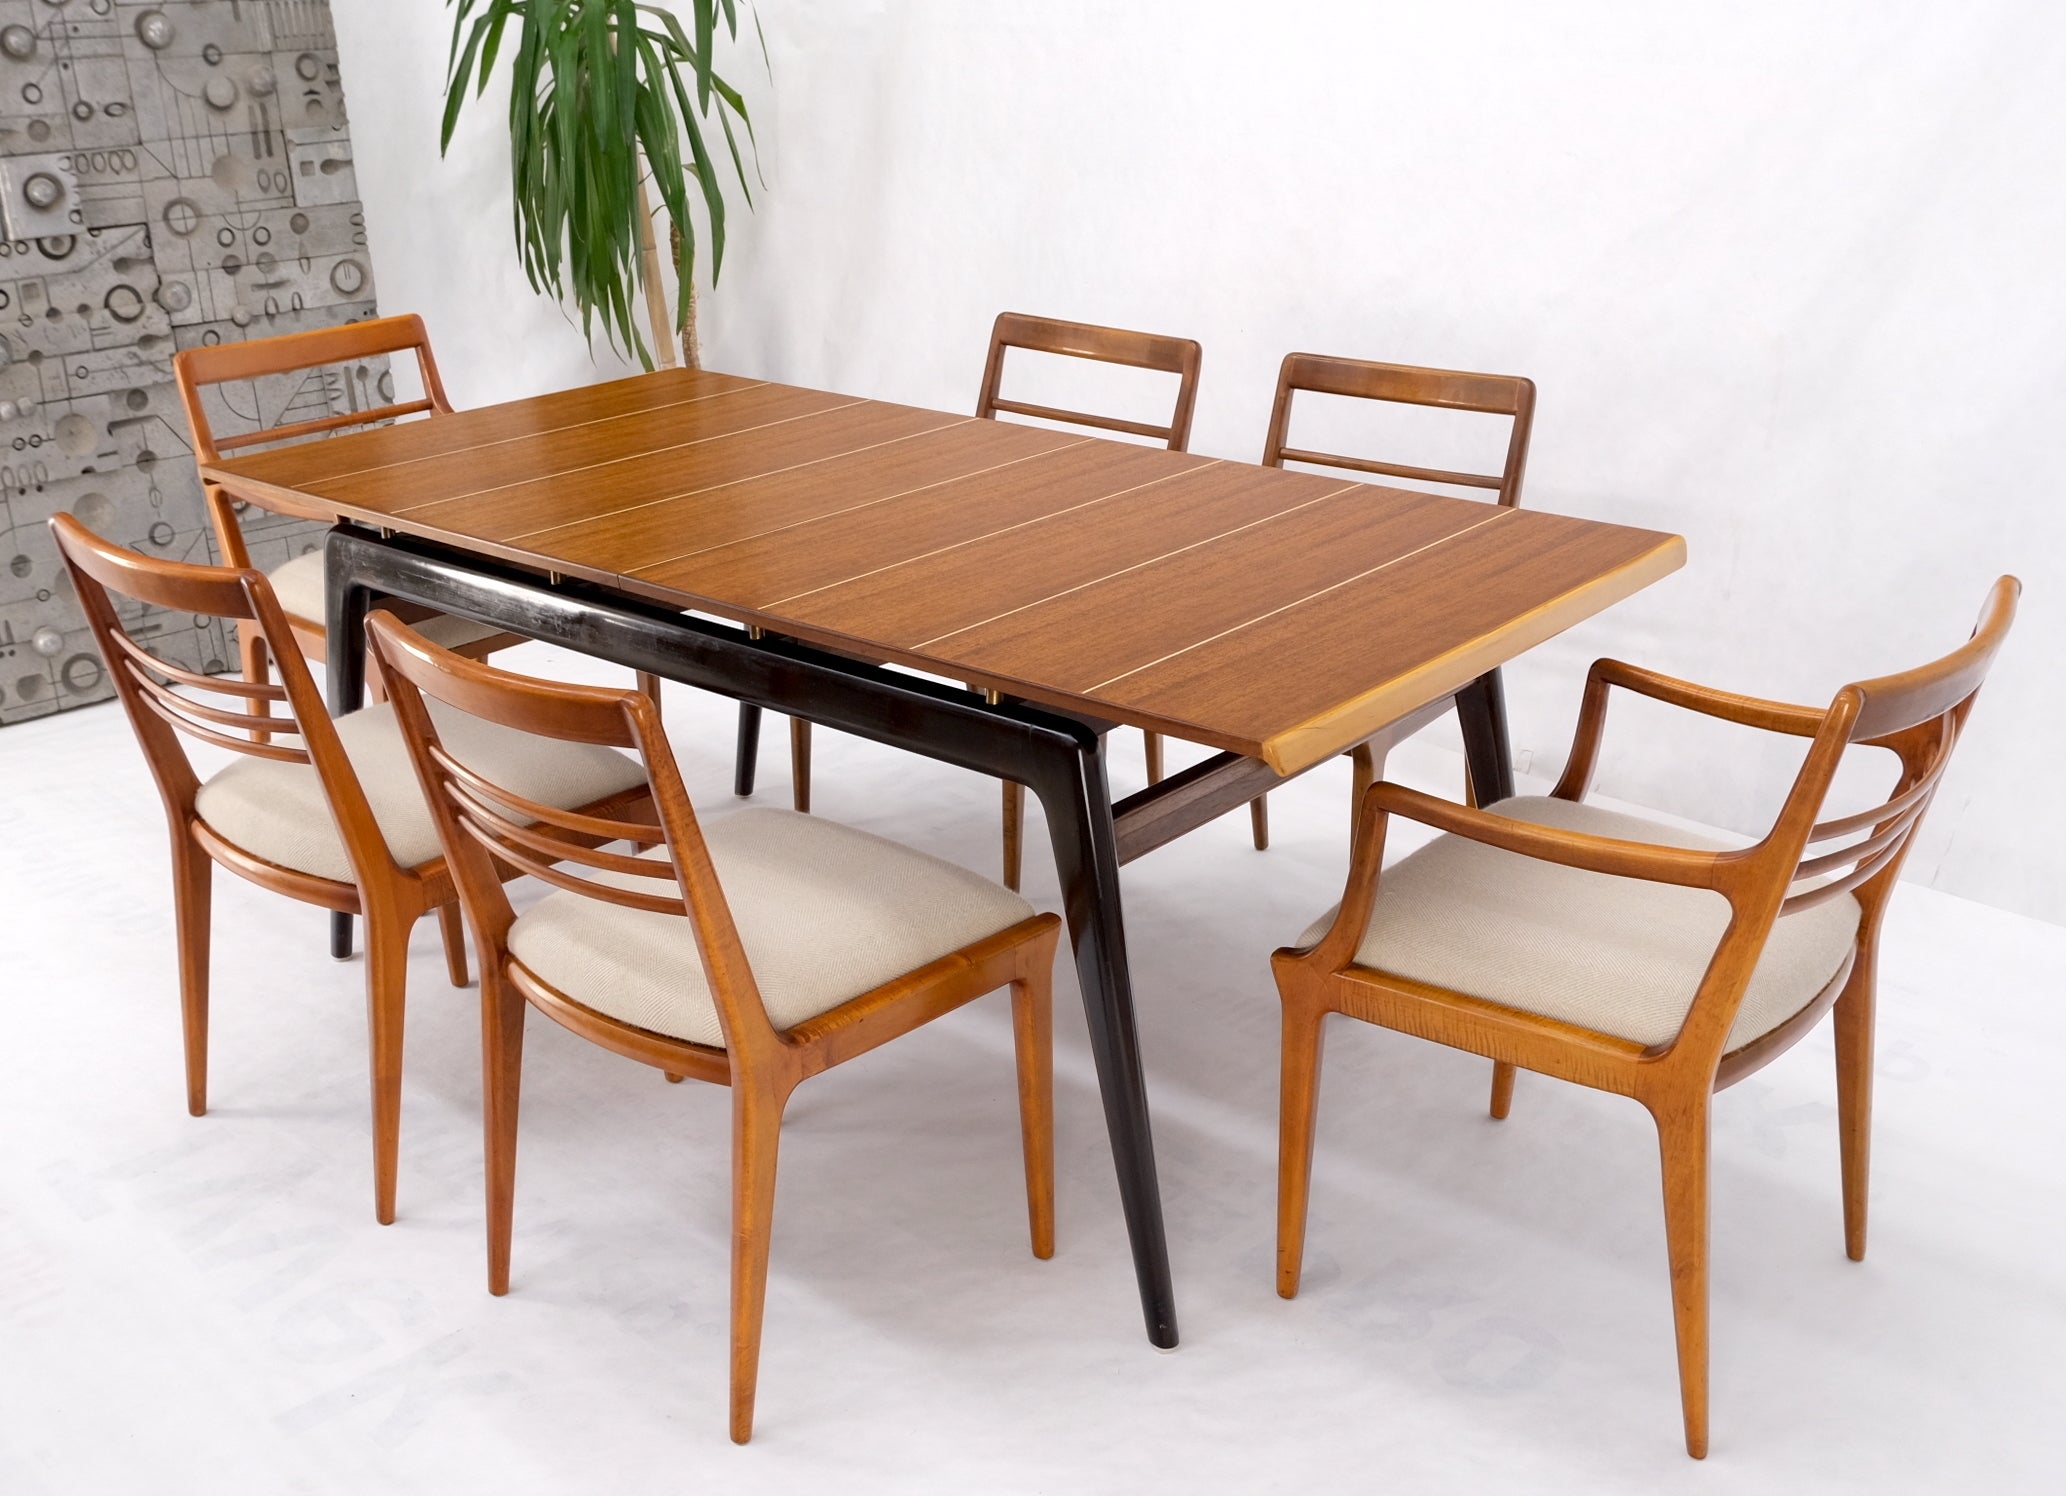 Italian Mid-Century Modern dining table 8 chairs set new linen upholstery seats Mint!.
Measures- Chair: 18'' x 20'' x 33'' & seat height: 19''.
Table: 36'' x 72'' × 30'' & leaf: 1 x 18'' wide.